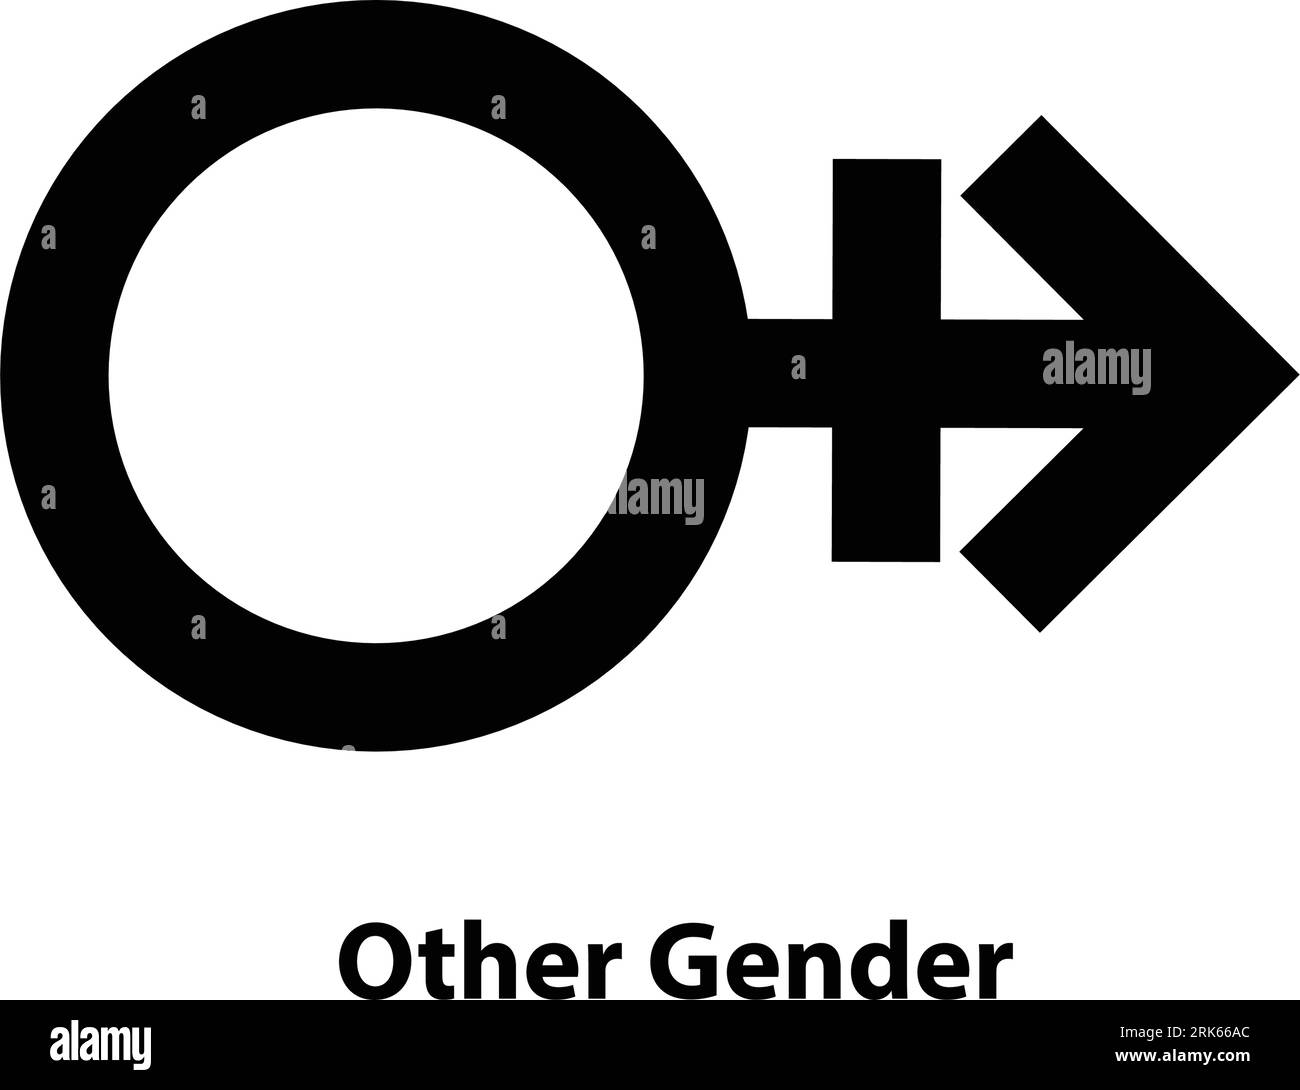 Other gender Symbol icon. Gender icon. vector sign isolated on a white background illustration for graphic and web design. Stock Vector